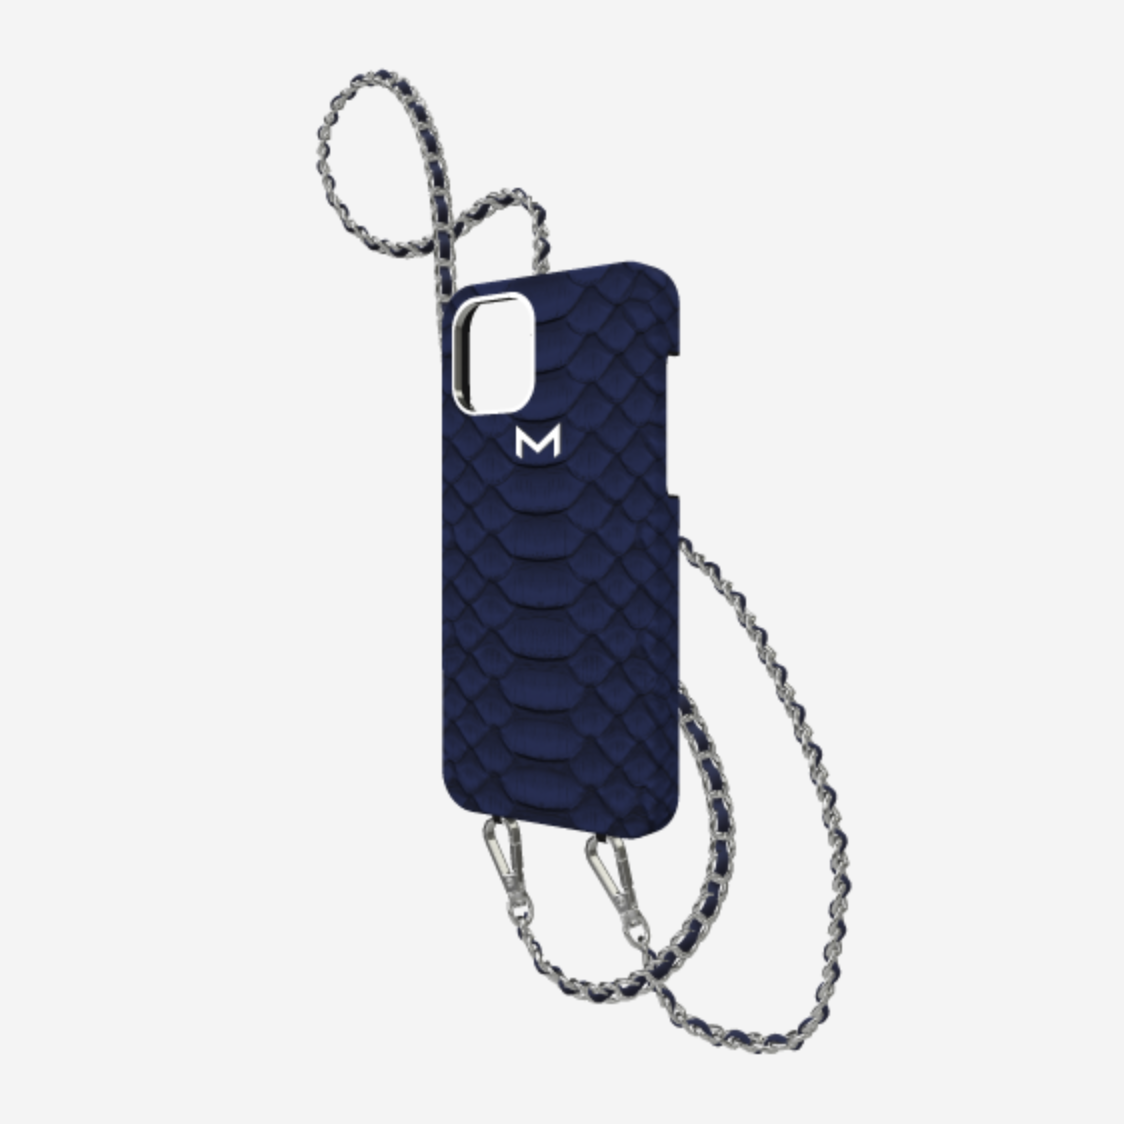 Necklace Case for iPhone 13 Pro Max in Genuine Python Navy Blue Steel 316 